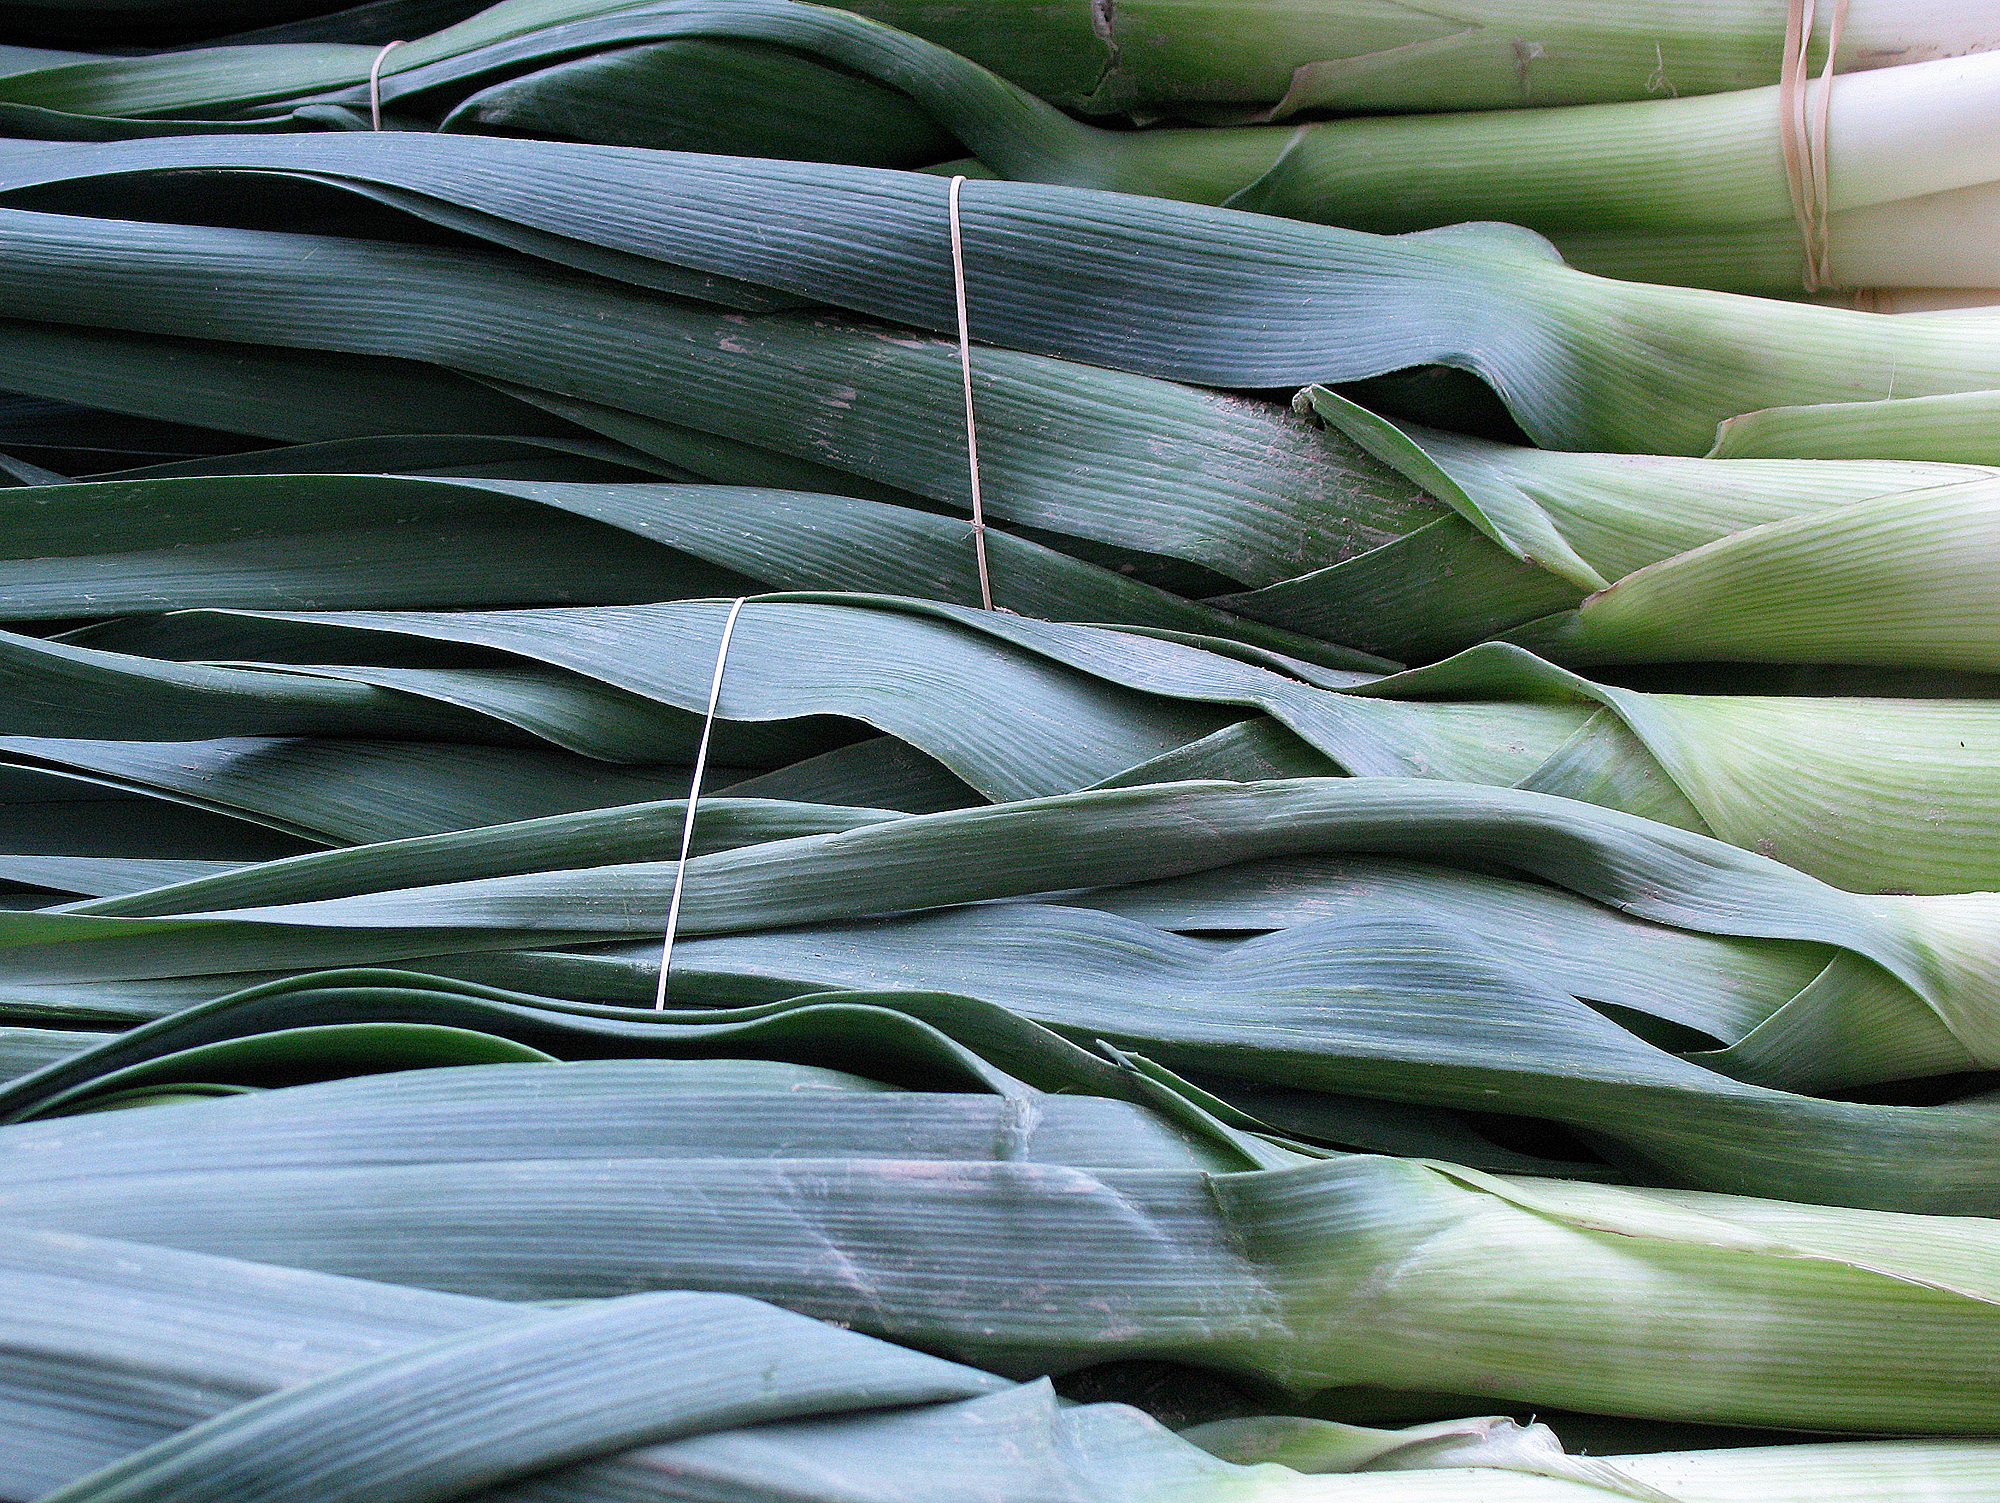 Leeks don’t produce bulbs like onions do, but they “stash their flavor in thick, juicy stems that look like huge scallions,” says Casanova.